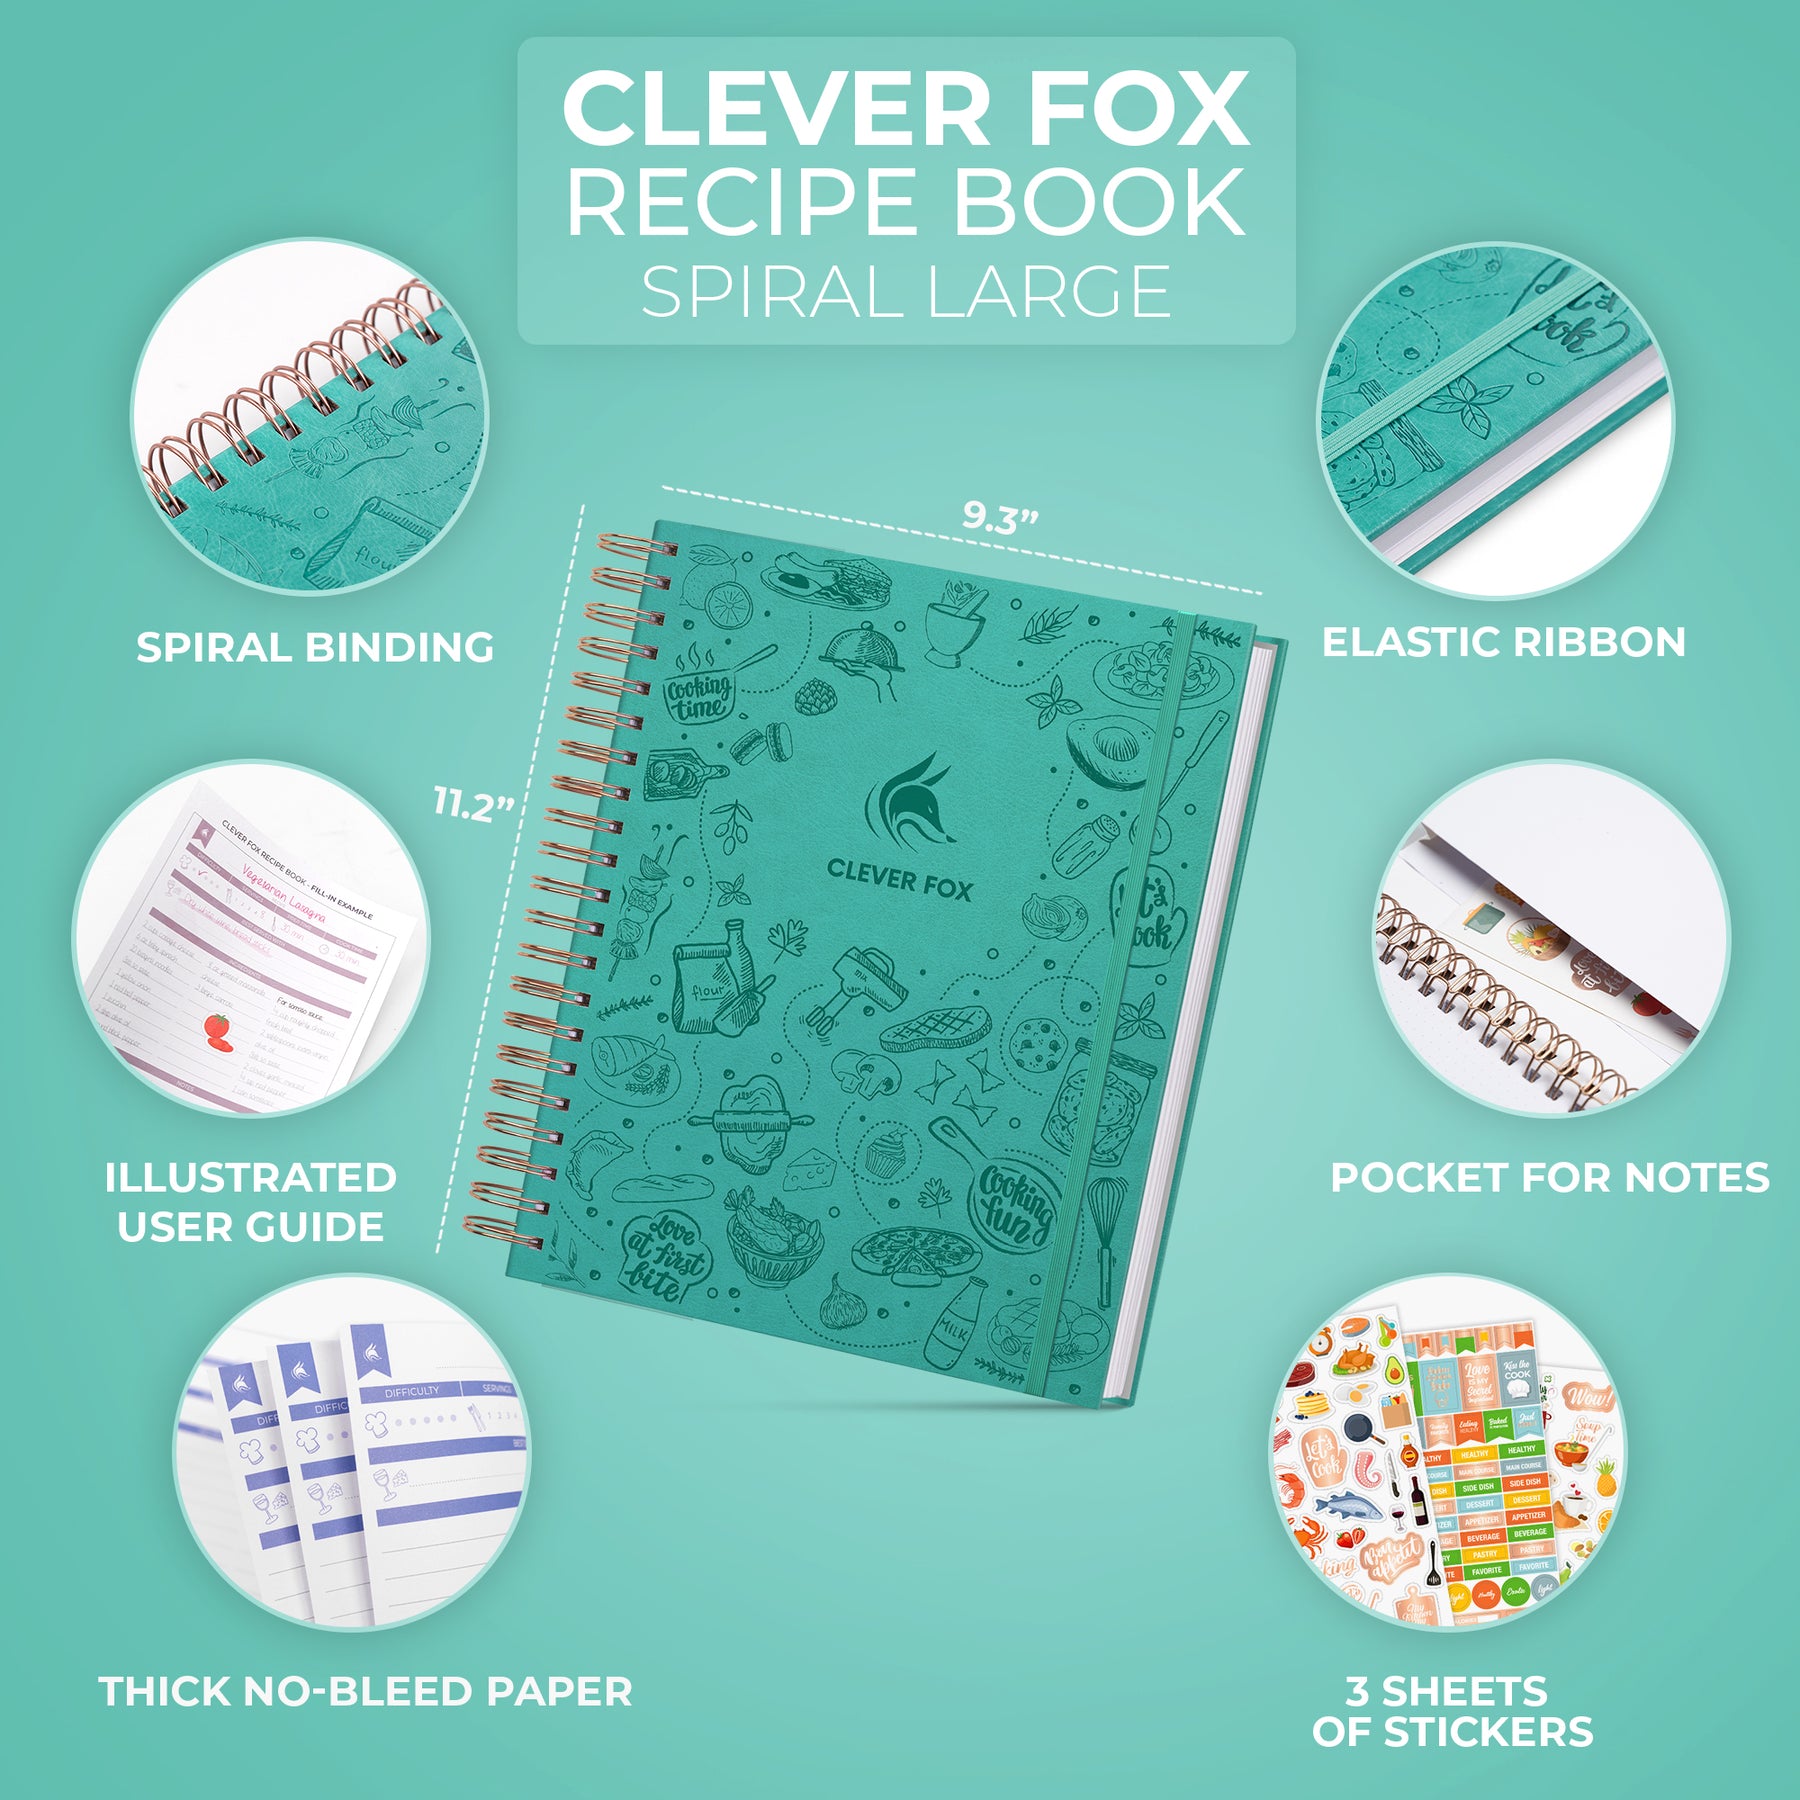 Clever Fox Recipe Book - Make Your Own Family Cookbook & Blank Recipe Notebook Organizer, Empty Cooking Journal to Write in Reci